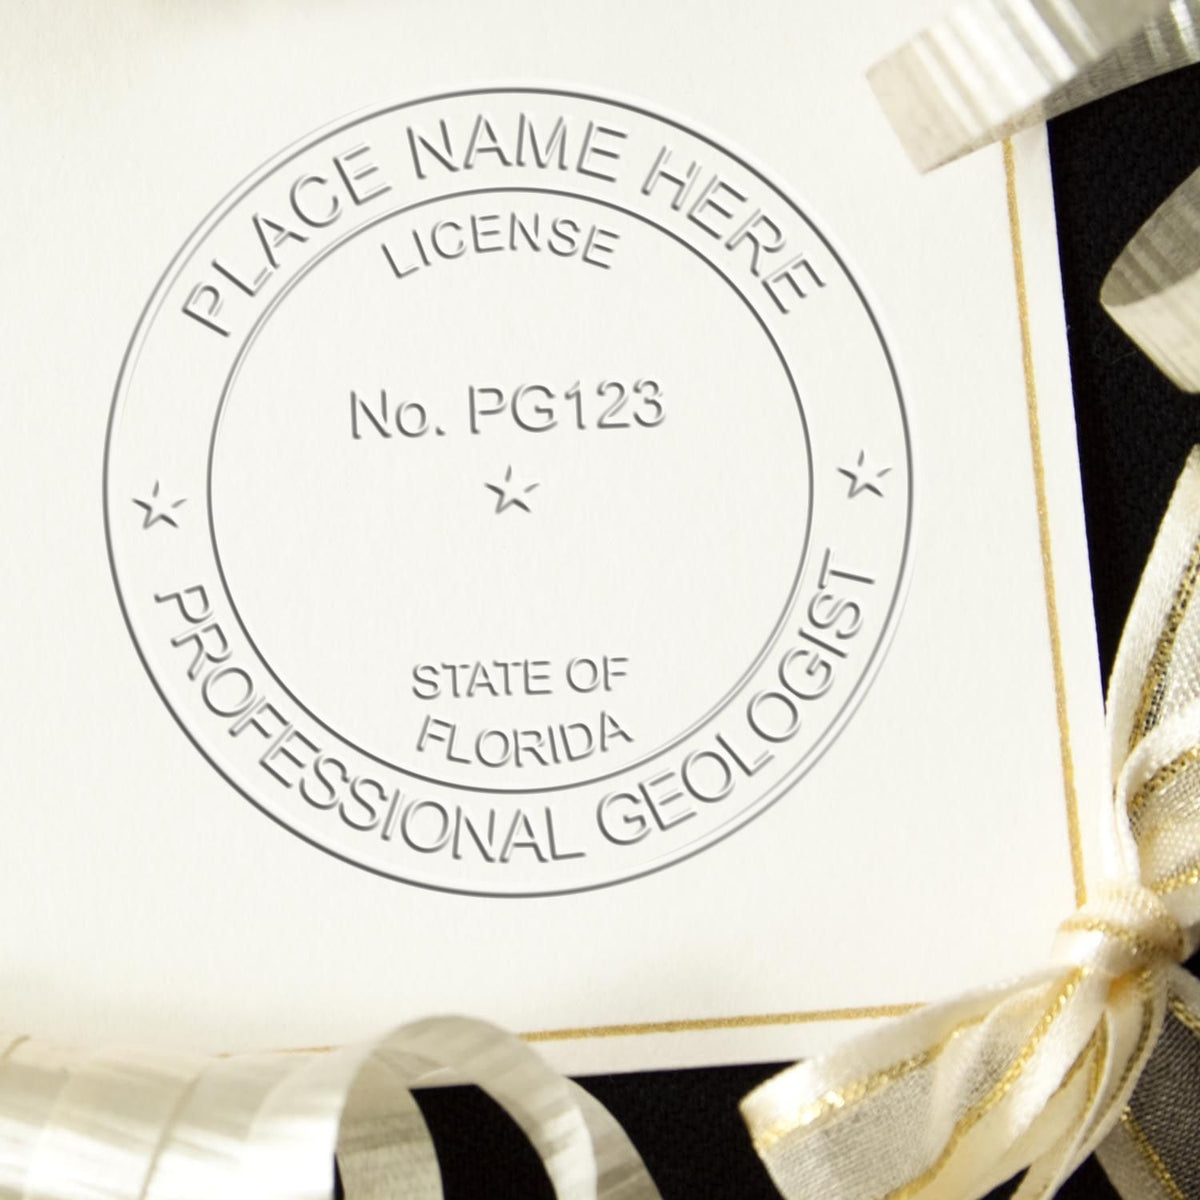 An in use photo of the Gift Florida Geologist Seal showing a sample imprint on a cardstock